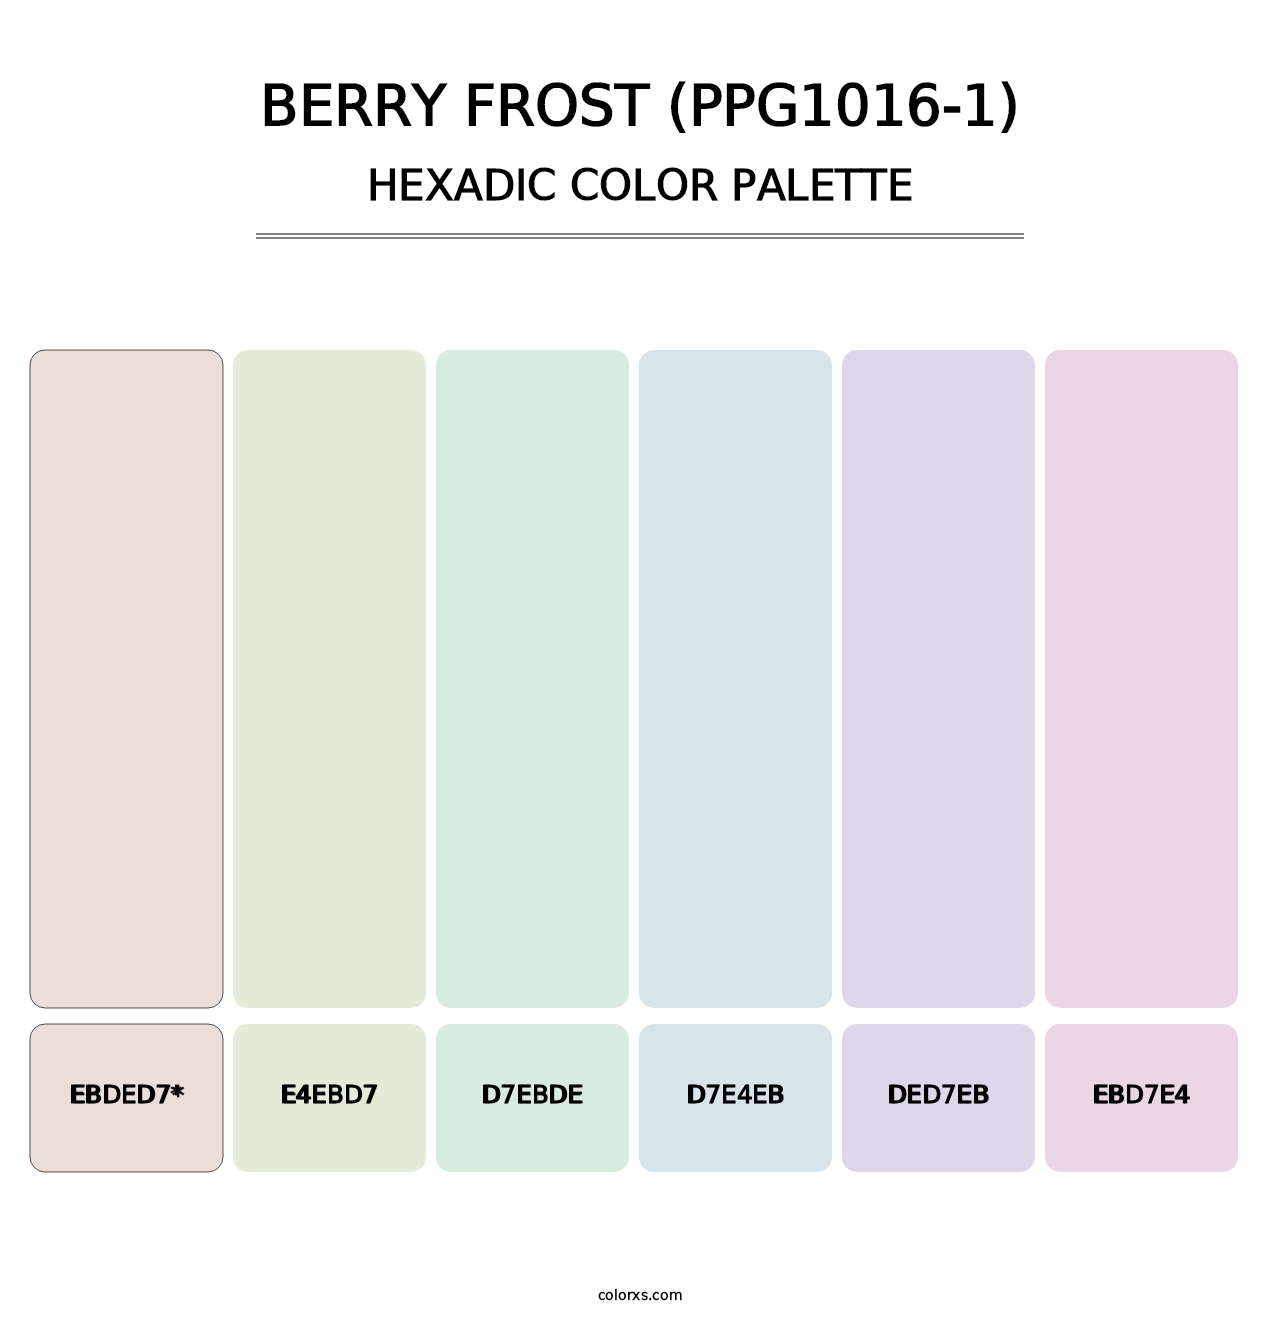 Berry Frost (PPG1016-1) - Hexadic Color Palette